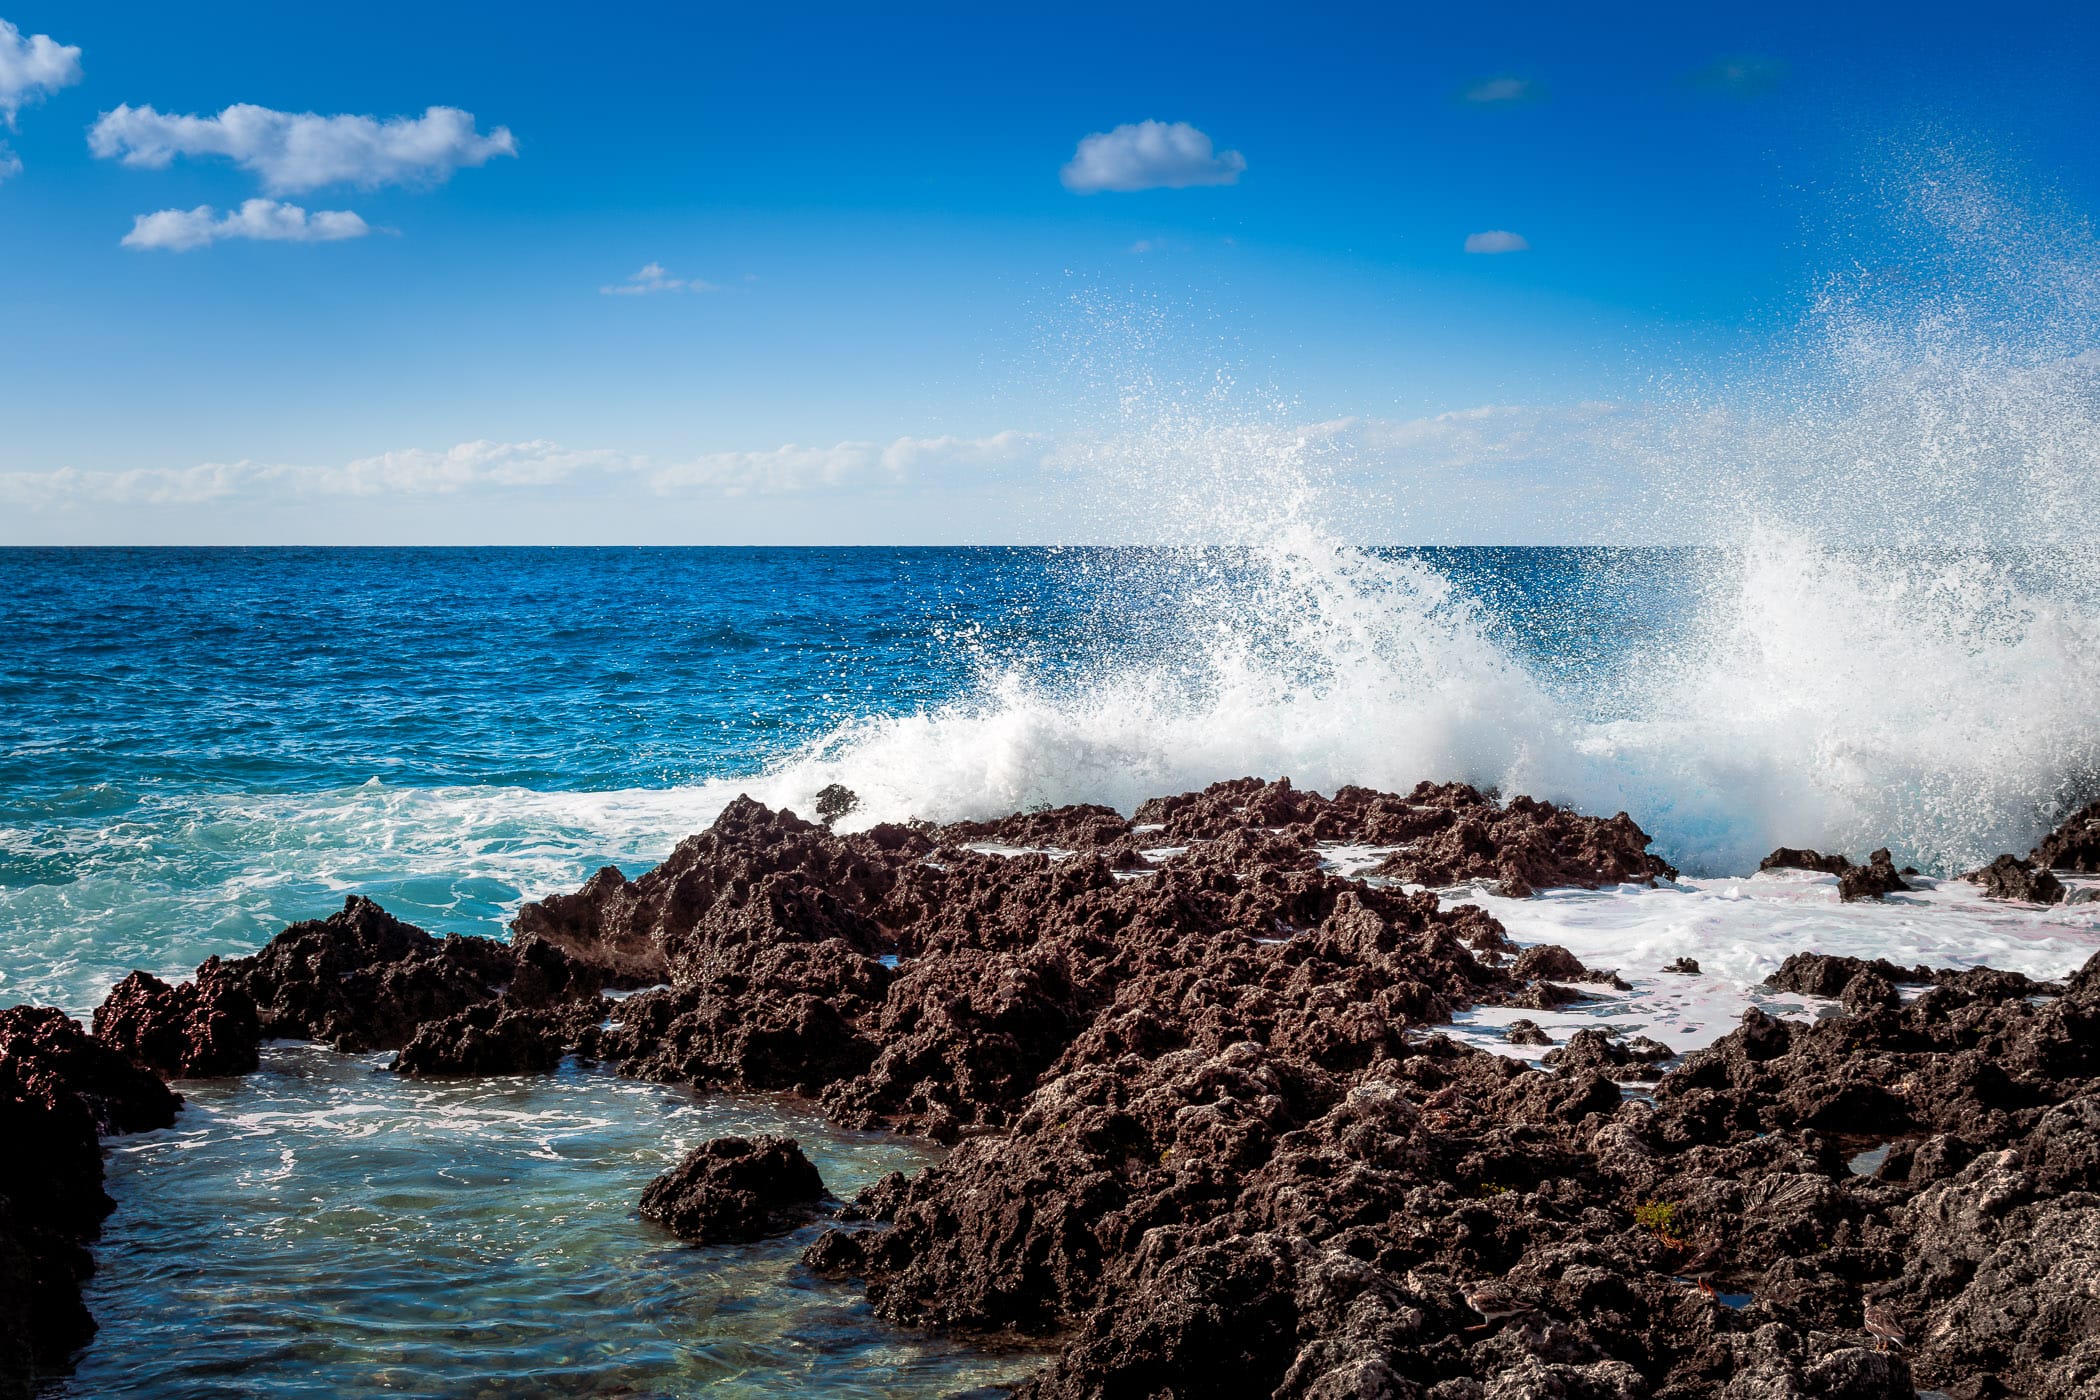 The Caribbean Sea splashes over rocks at Turtle Reef, Grand Cayman.